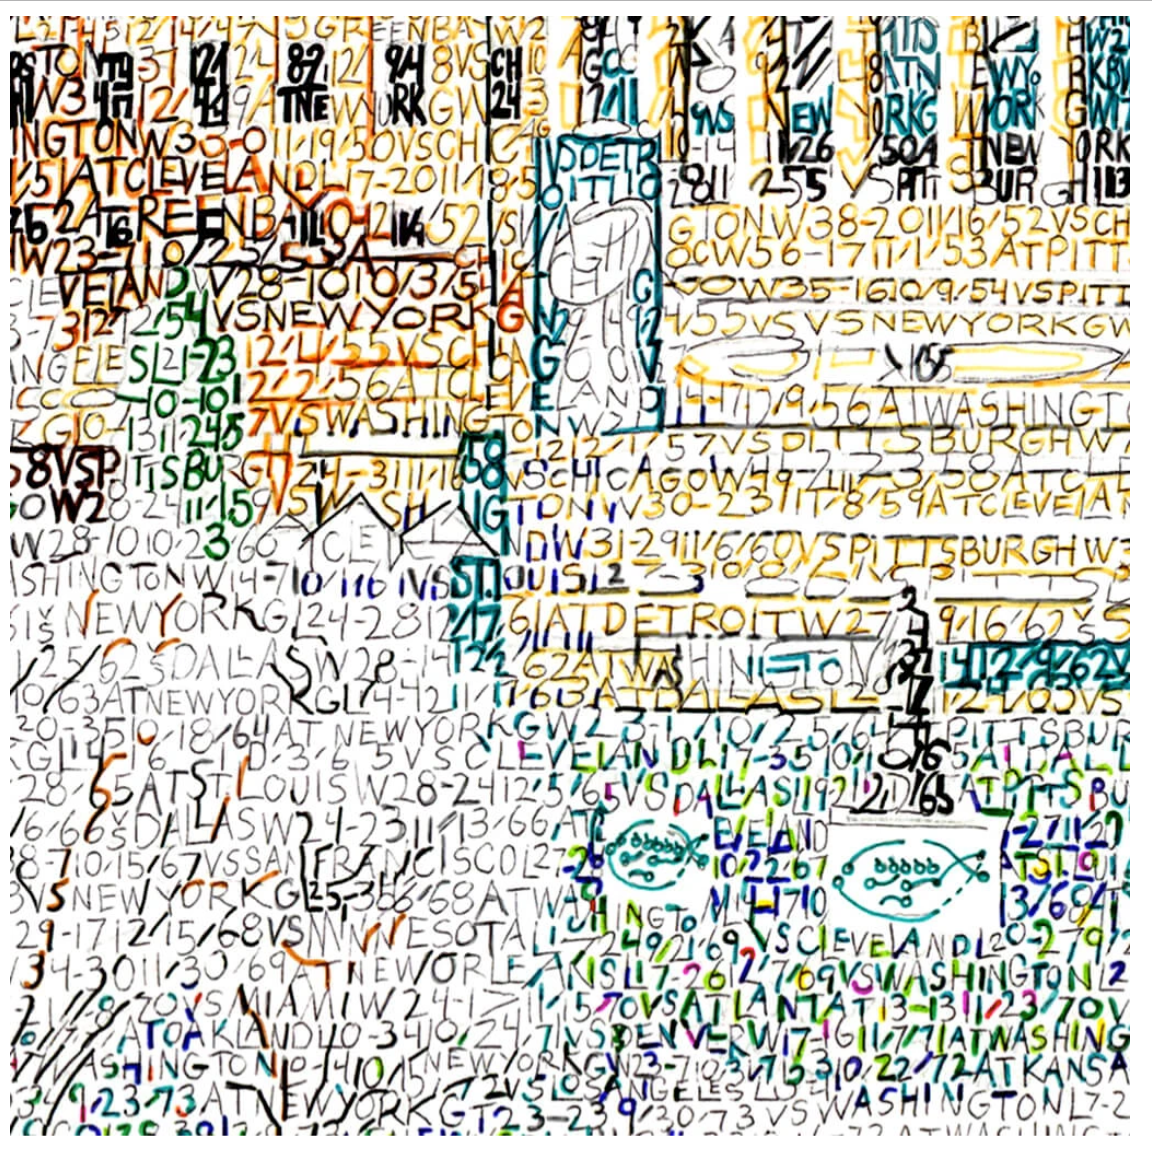 Philadelphia Eagles 2018 Championship Parade Print by Philly Word Art